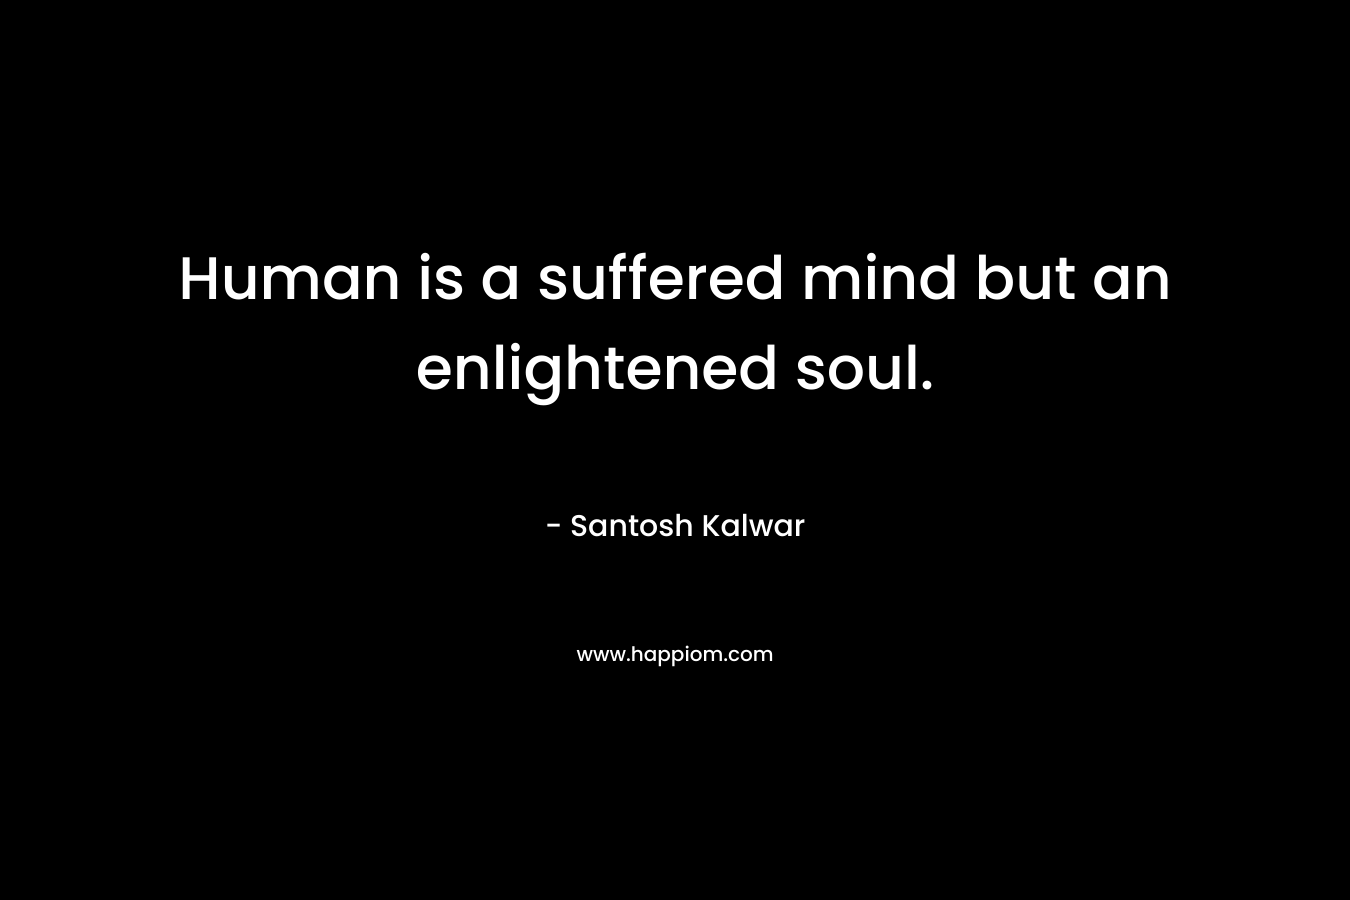 Human is a suffered mind but an enlightened soul.